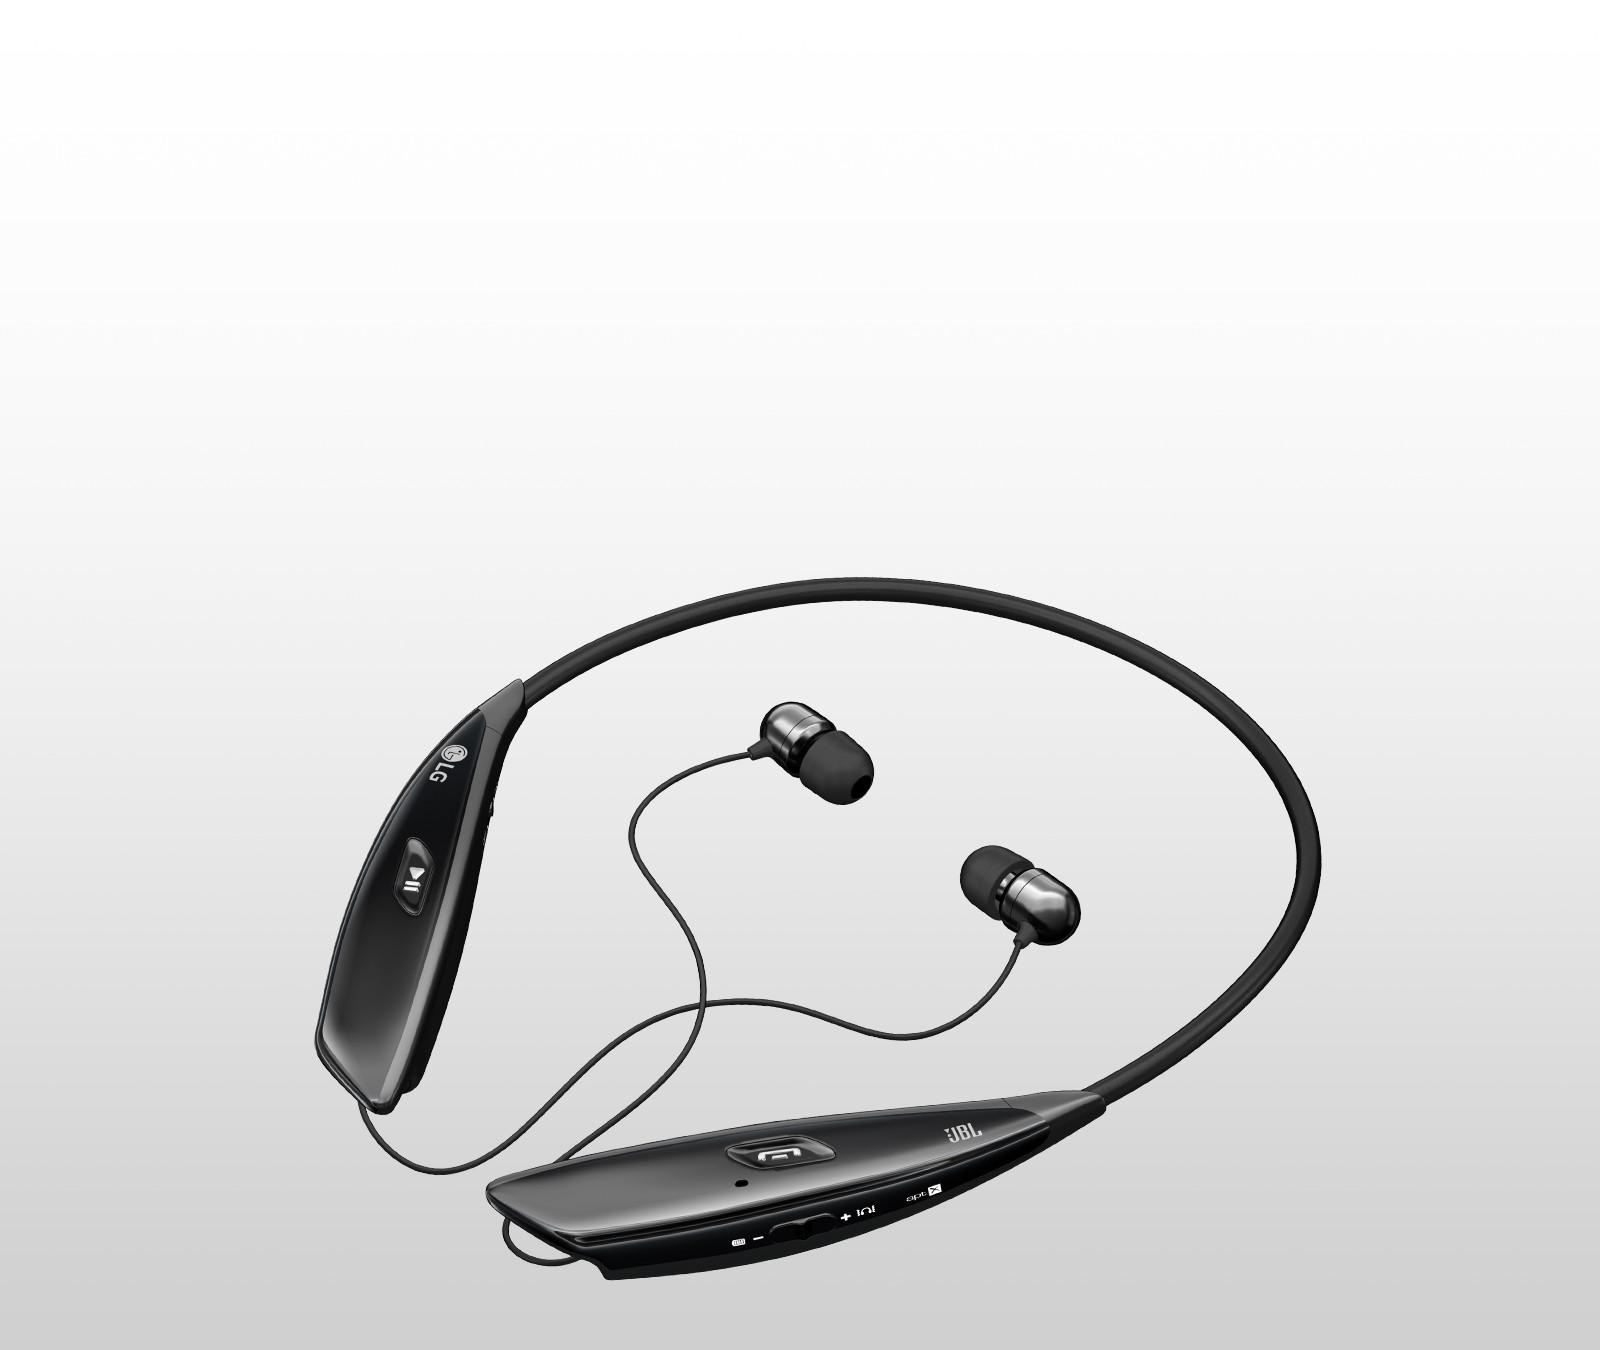 What are some common features on an LG wireless Bluetooth headset?